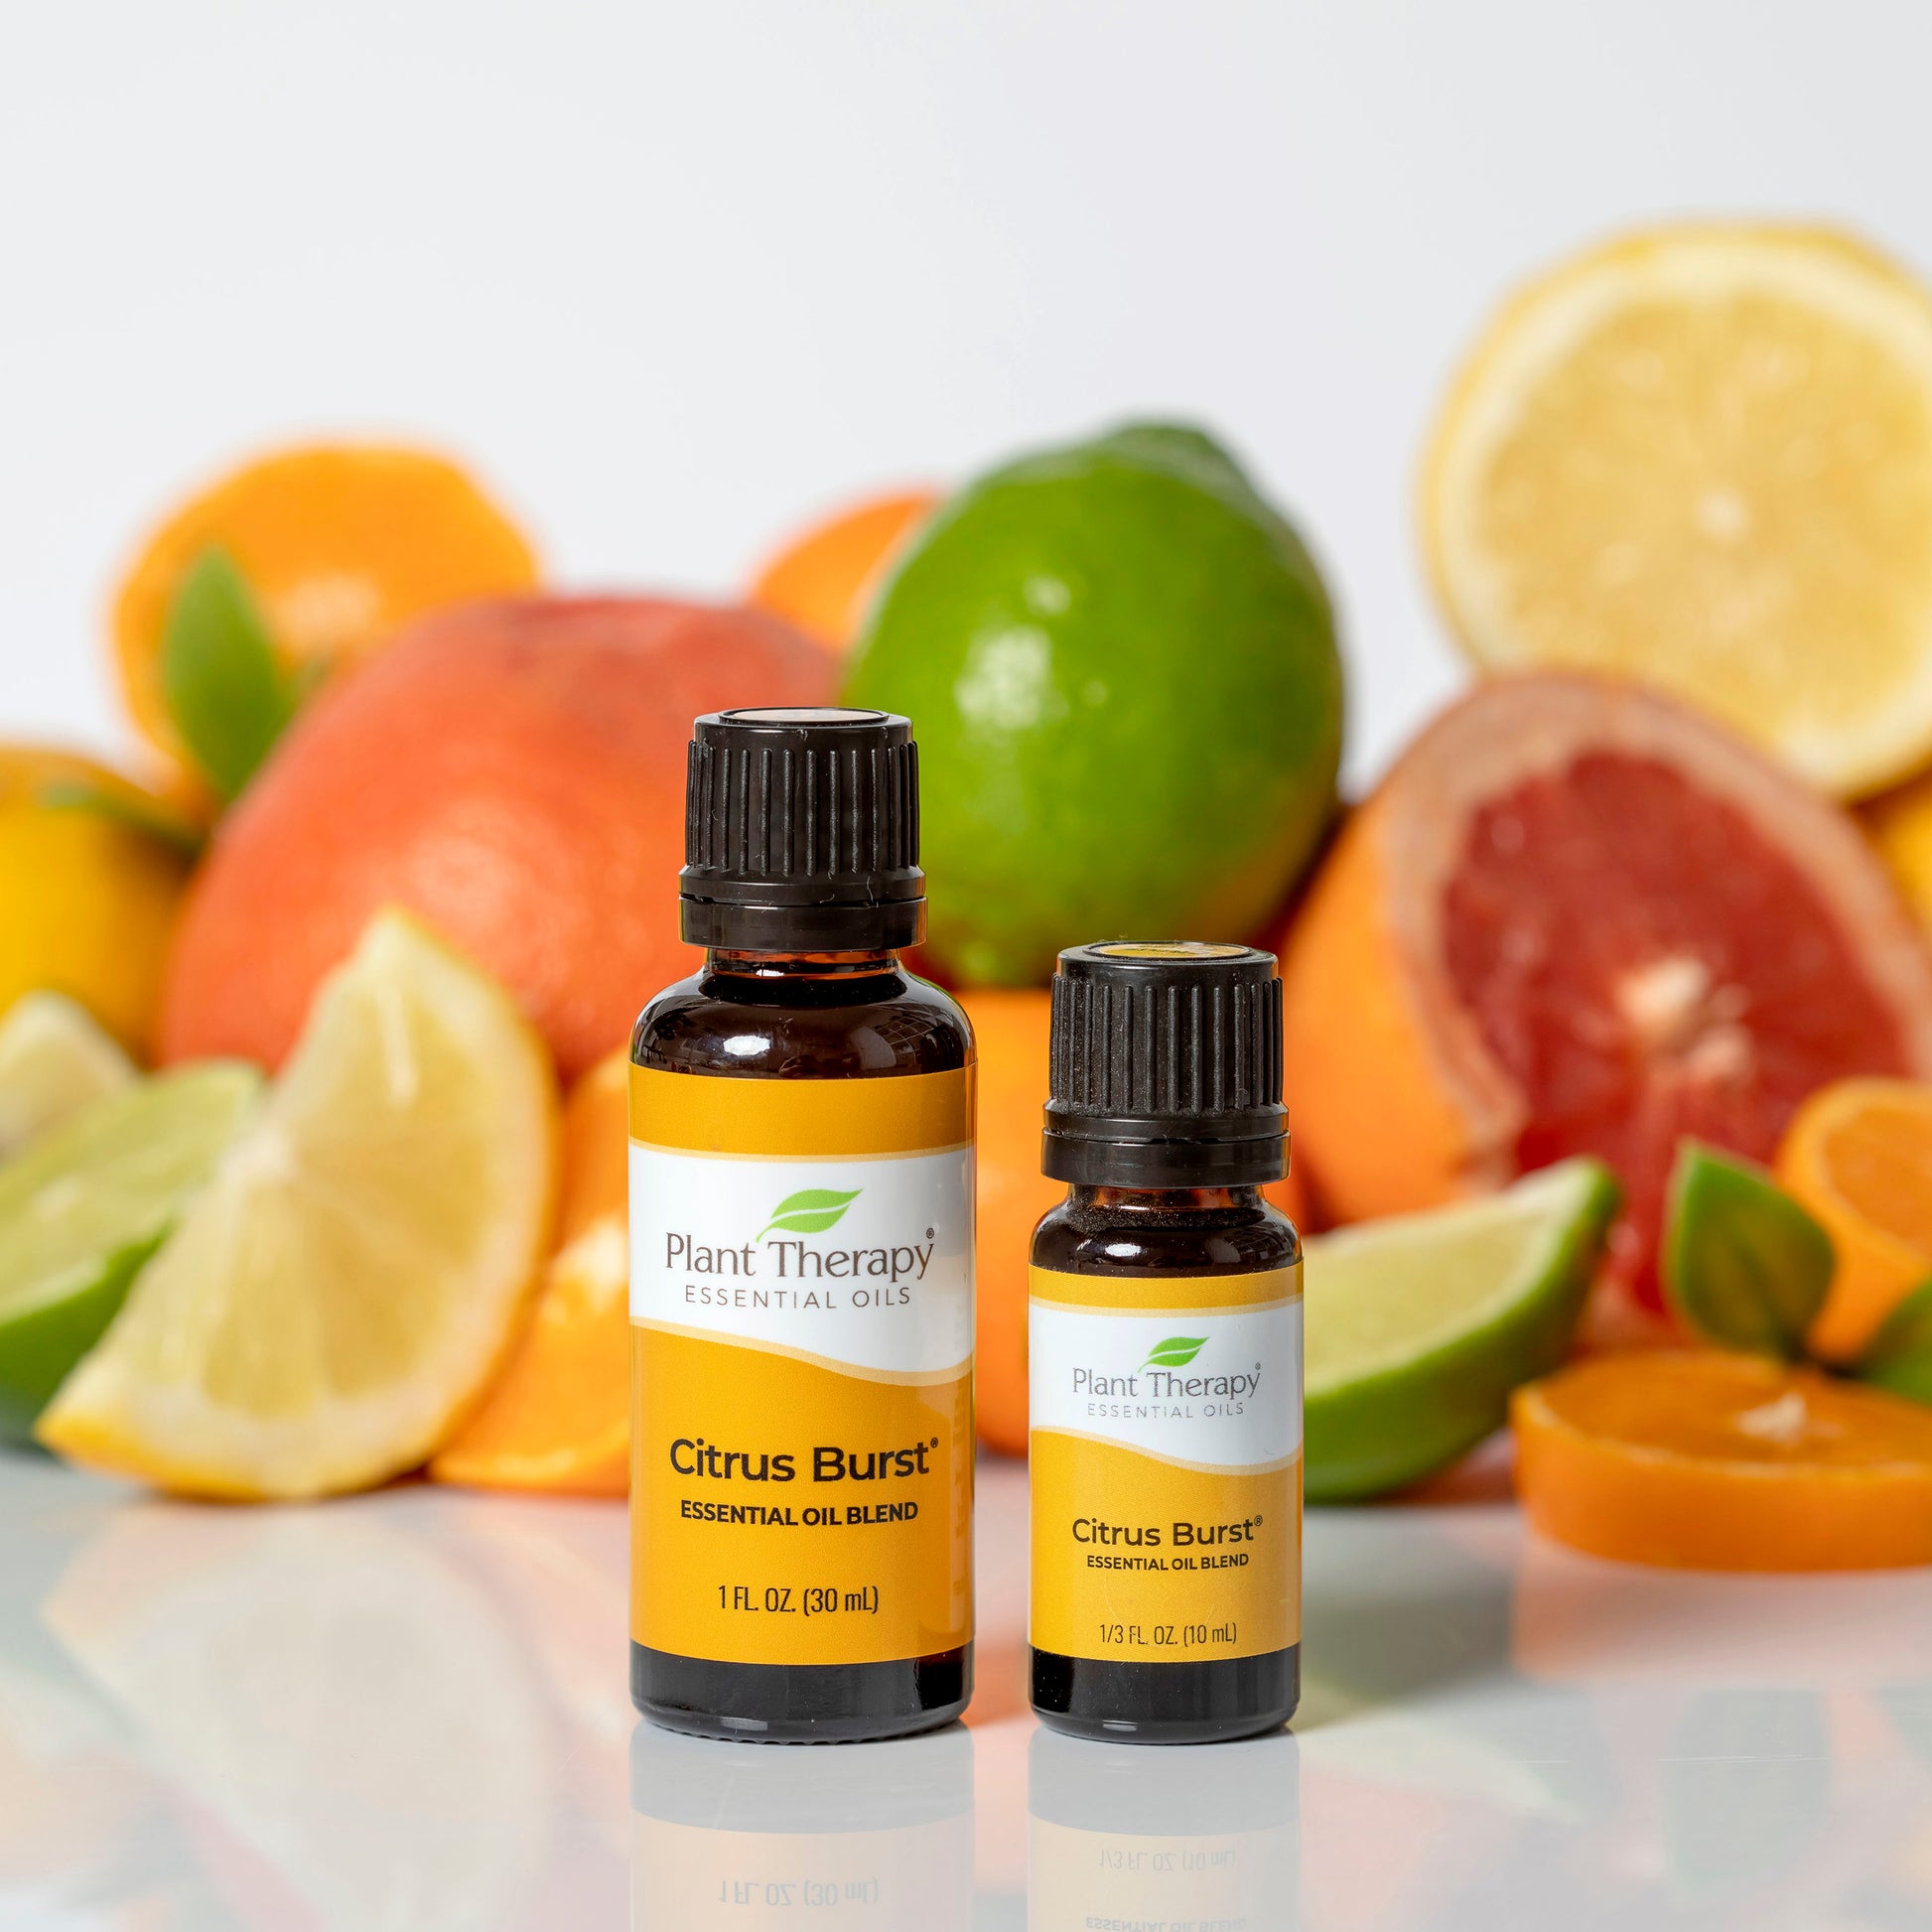 Citrus oil for enhancing food and drinks